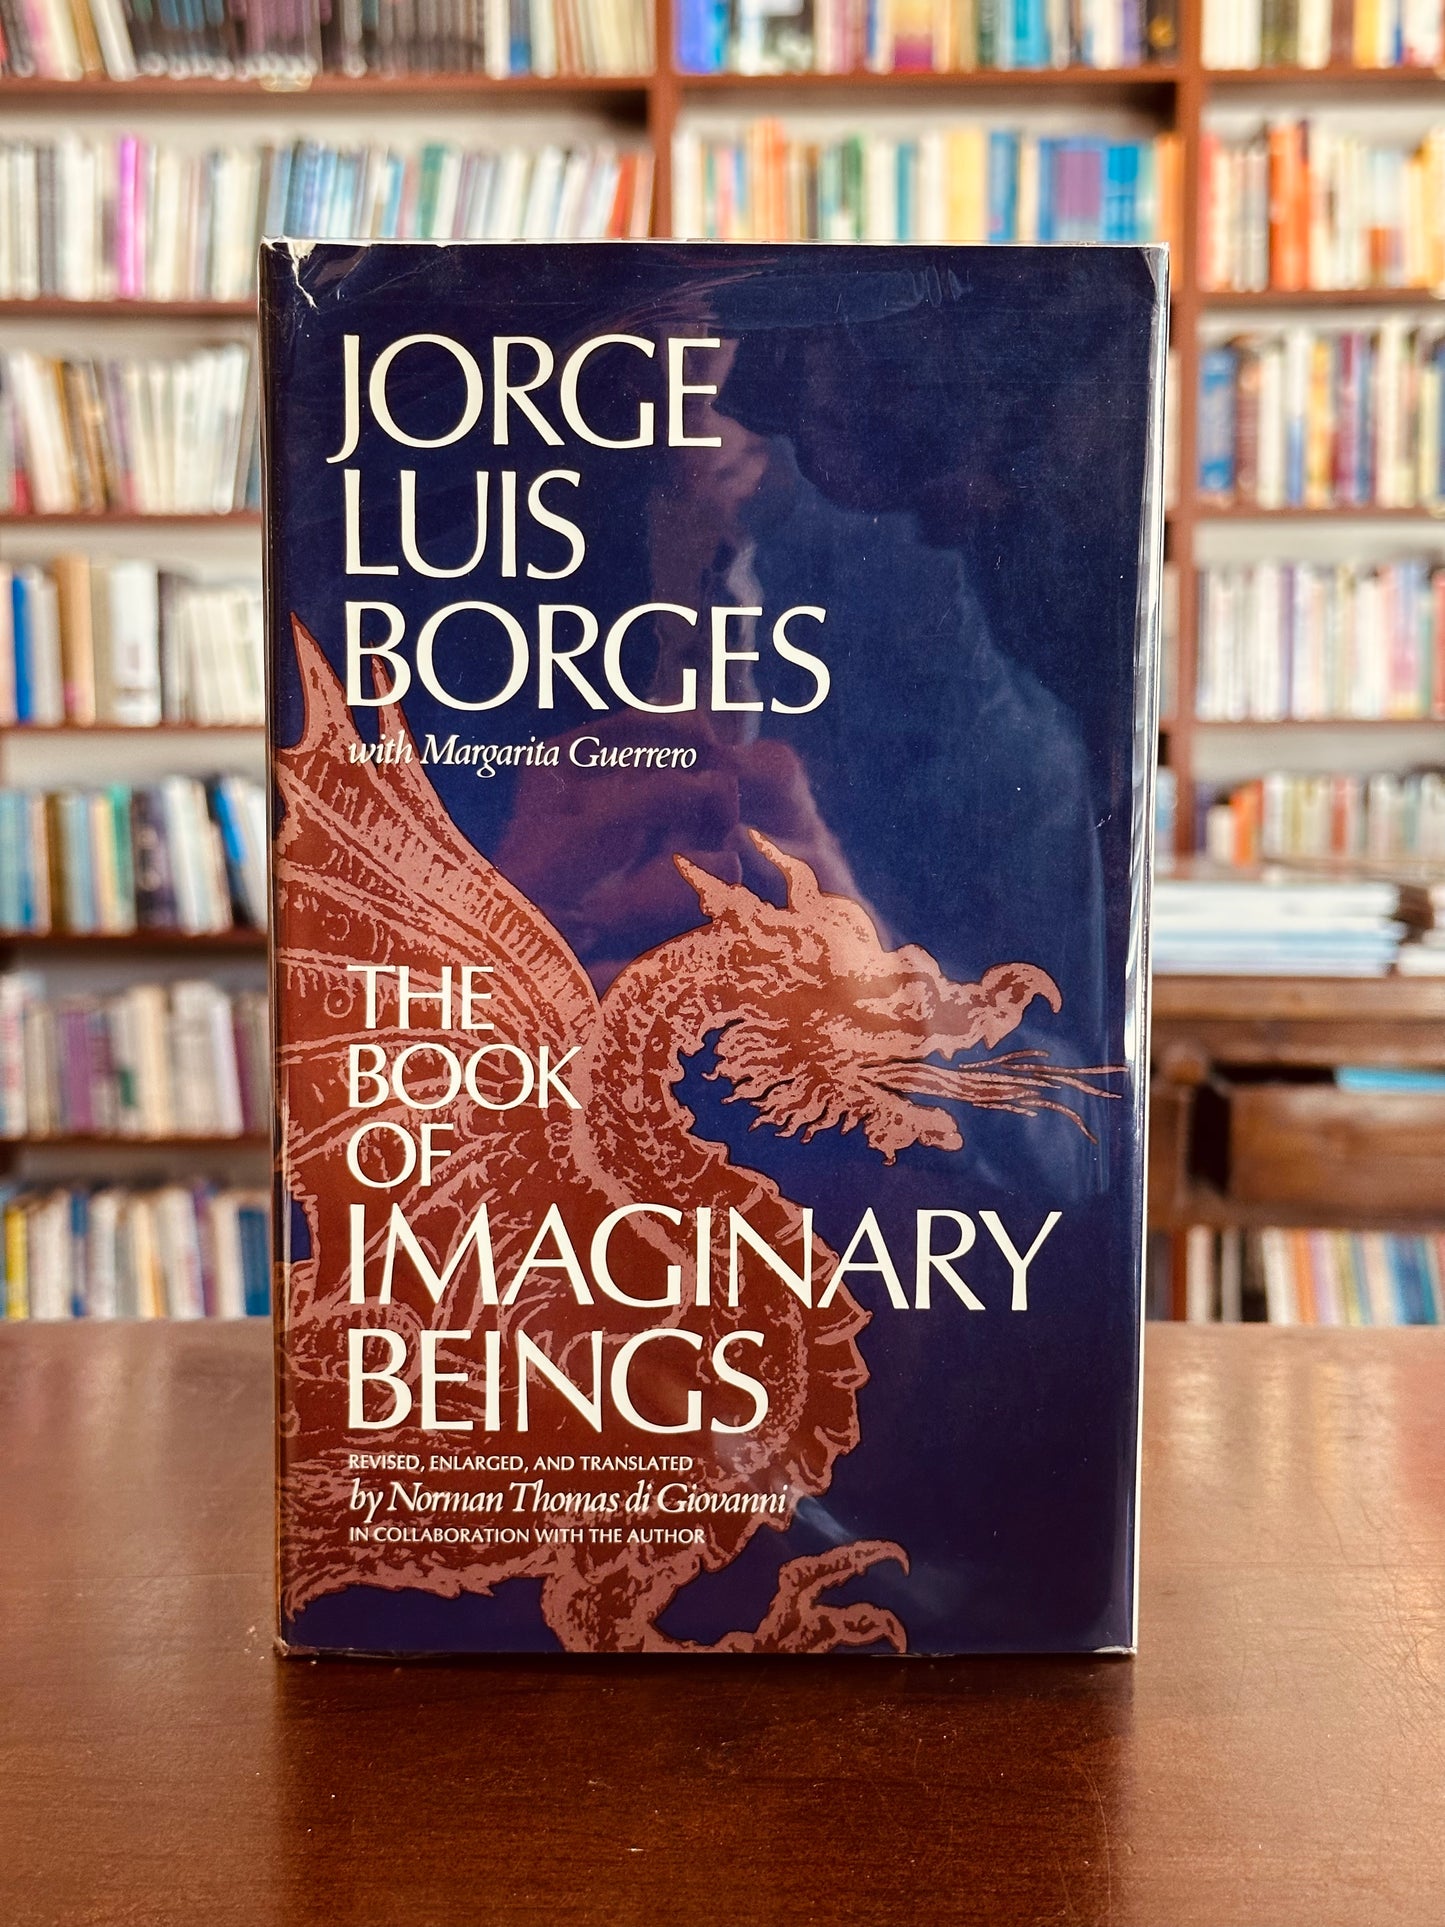 The Book of Imaginary Beings by Jorge Luis Borges (First Edition)